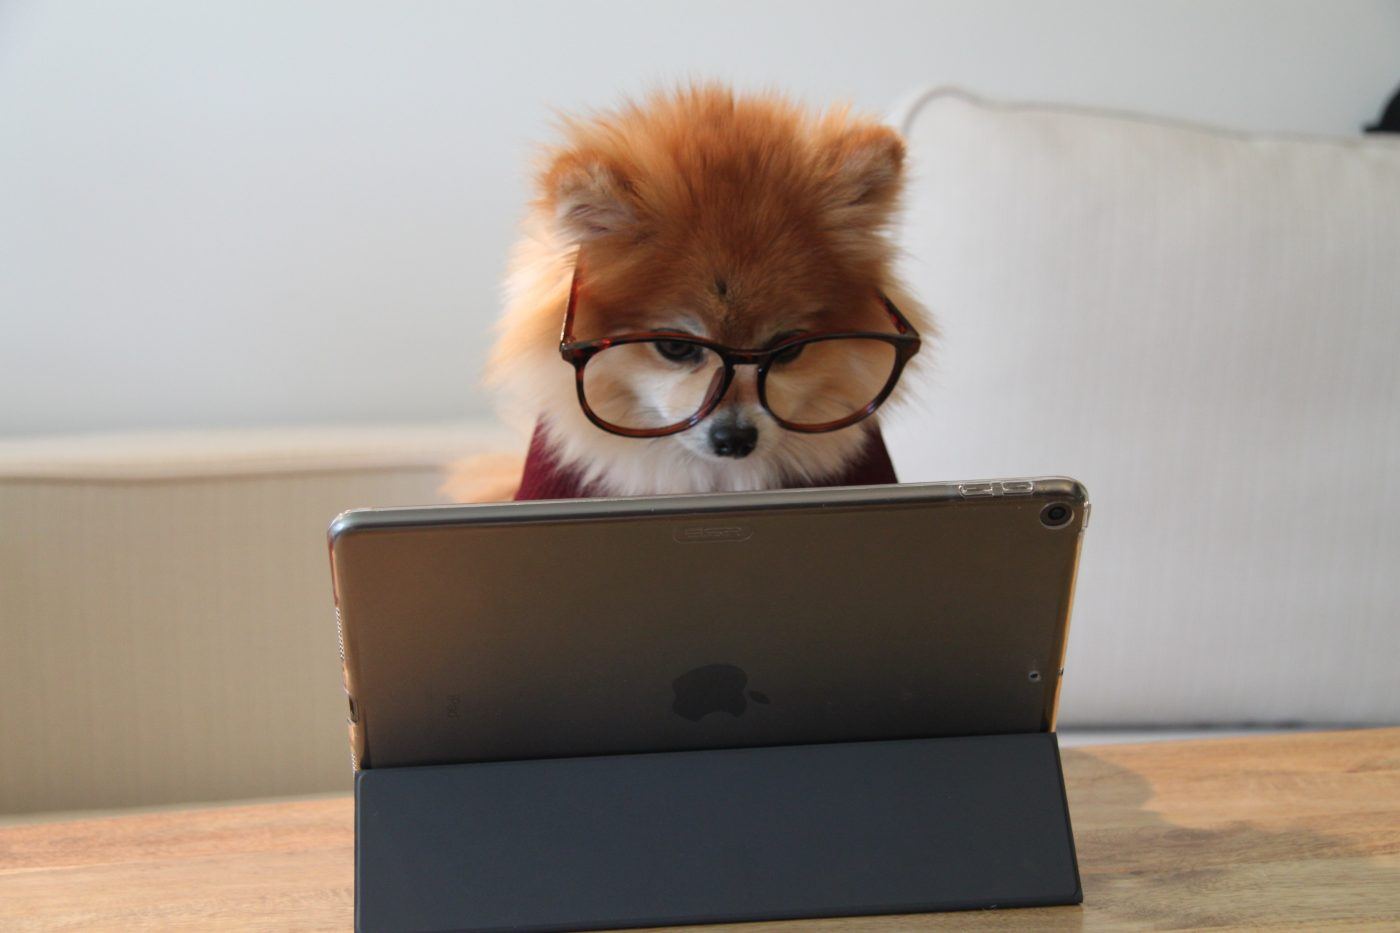 Fox in glasses searching for something on Google on a laptop